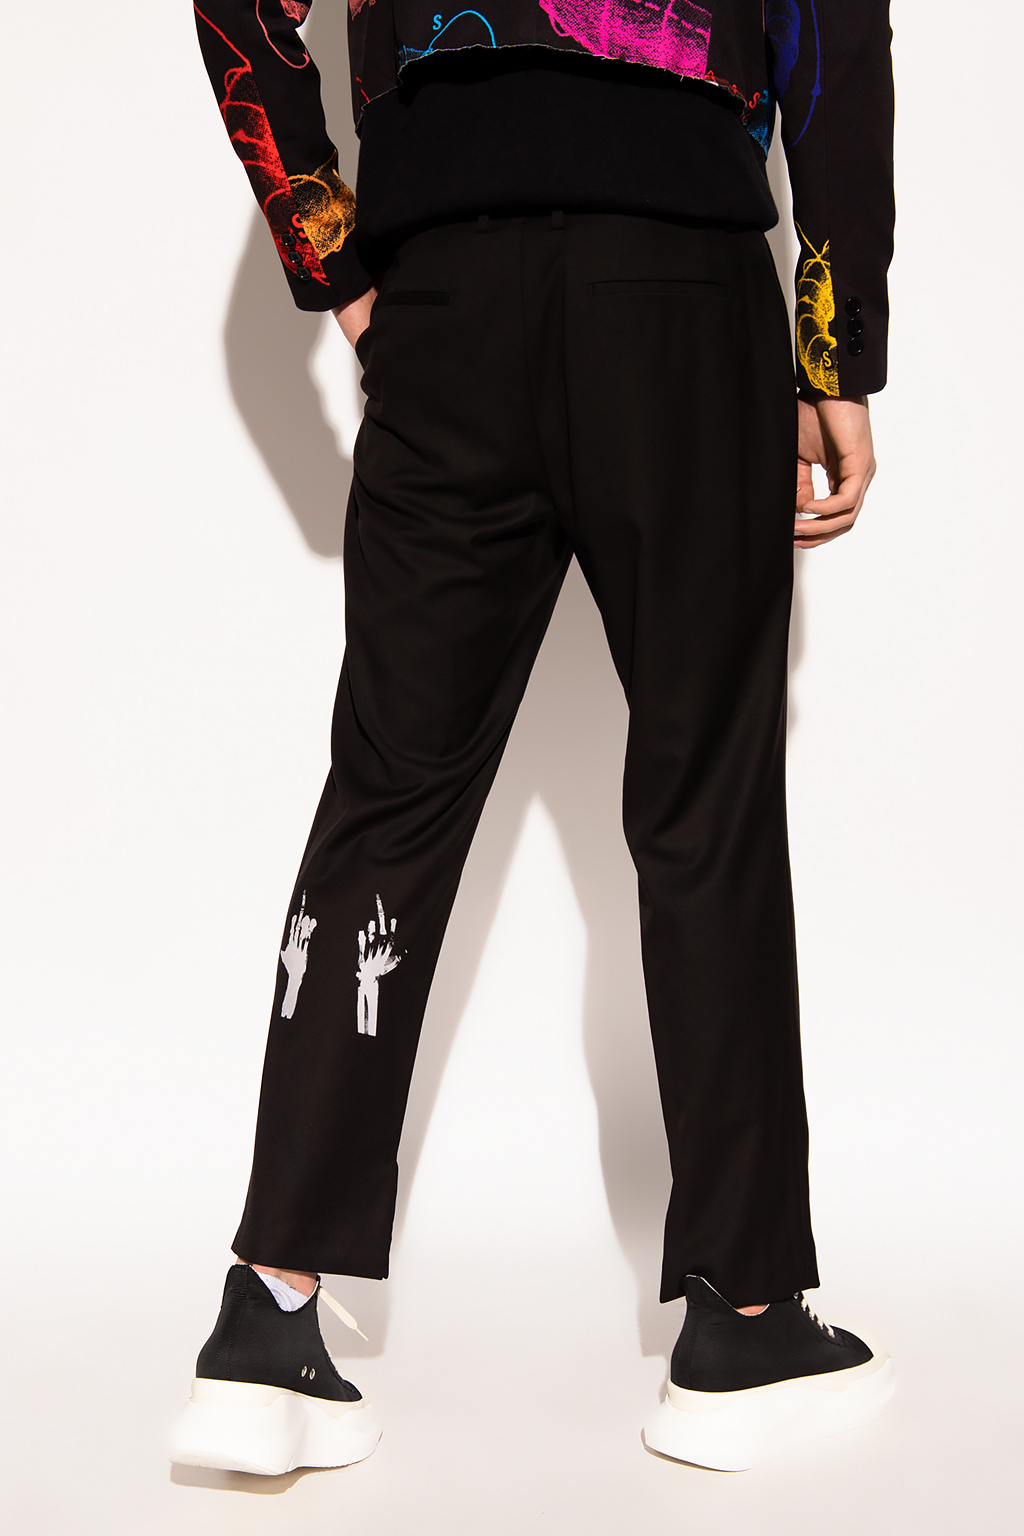 MSFTSrep waisted trousers with logo